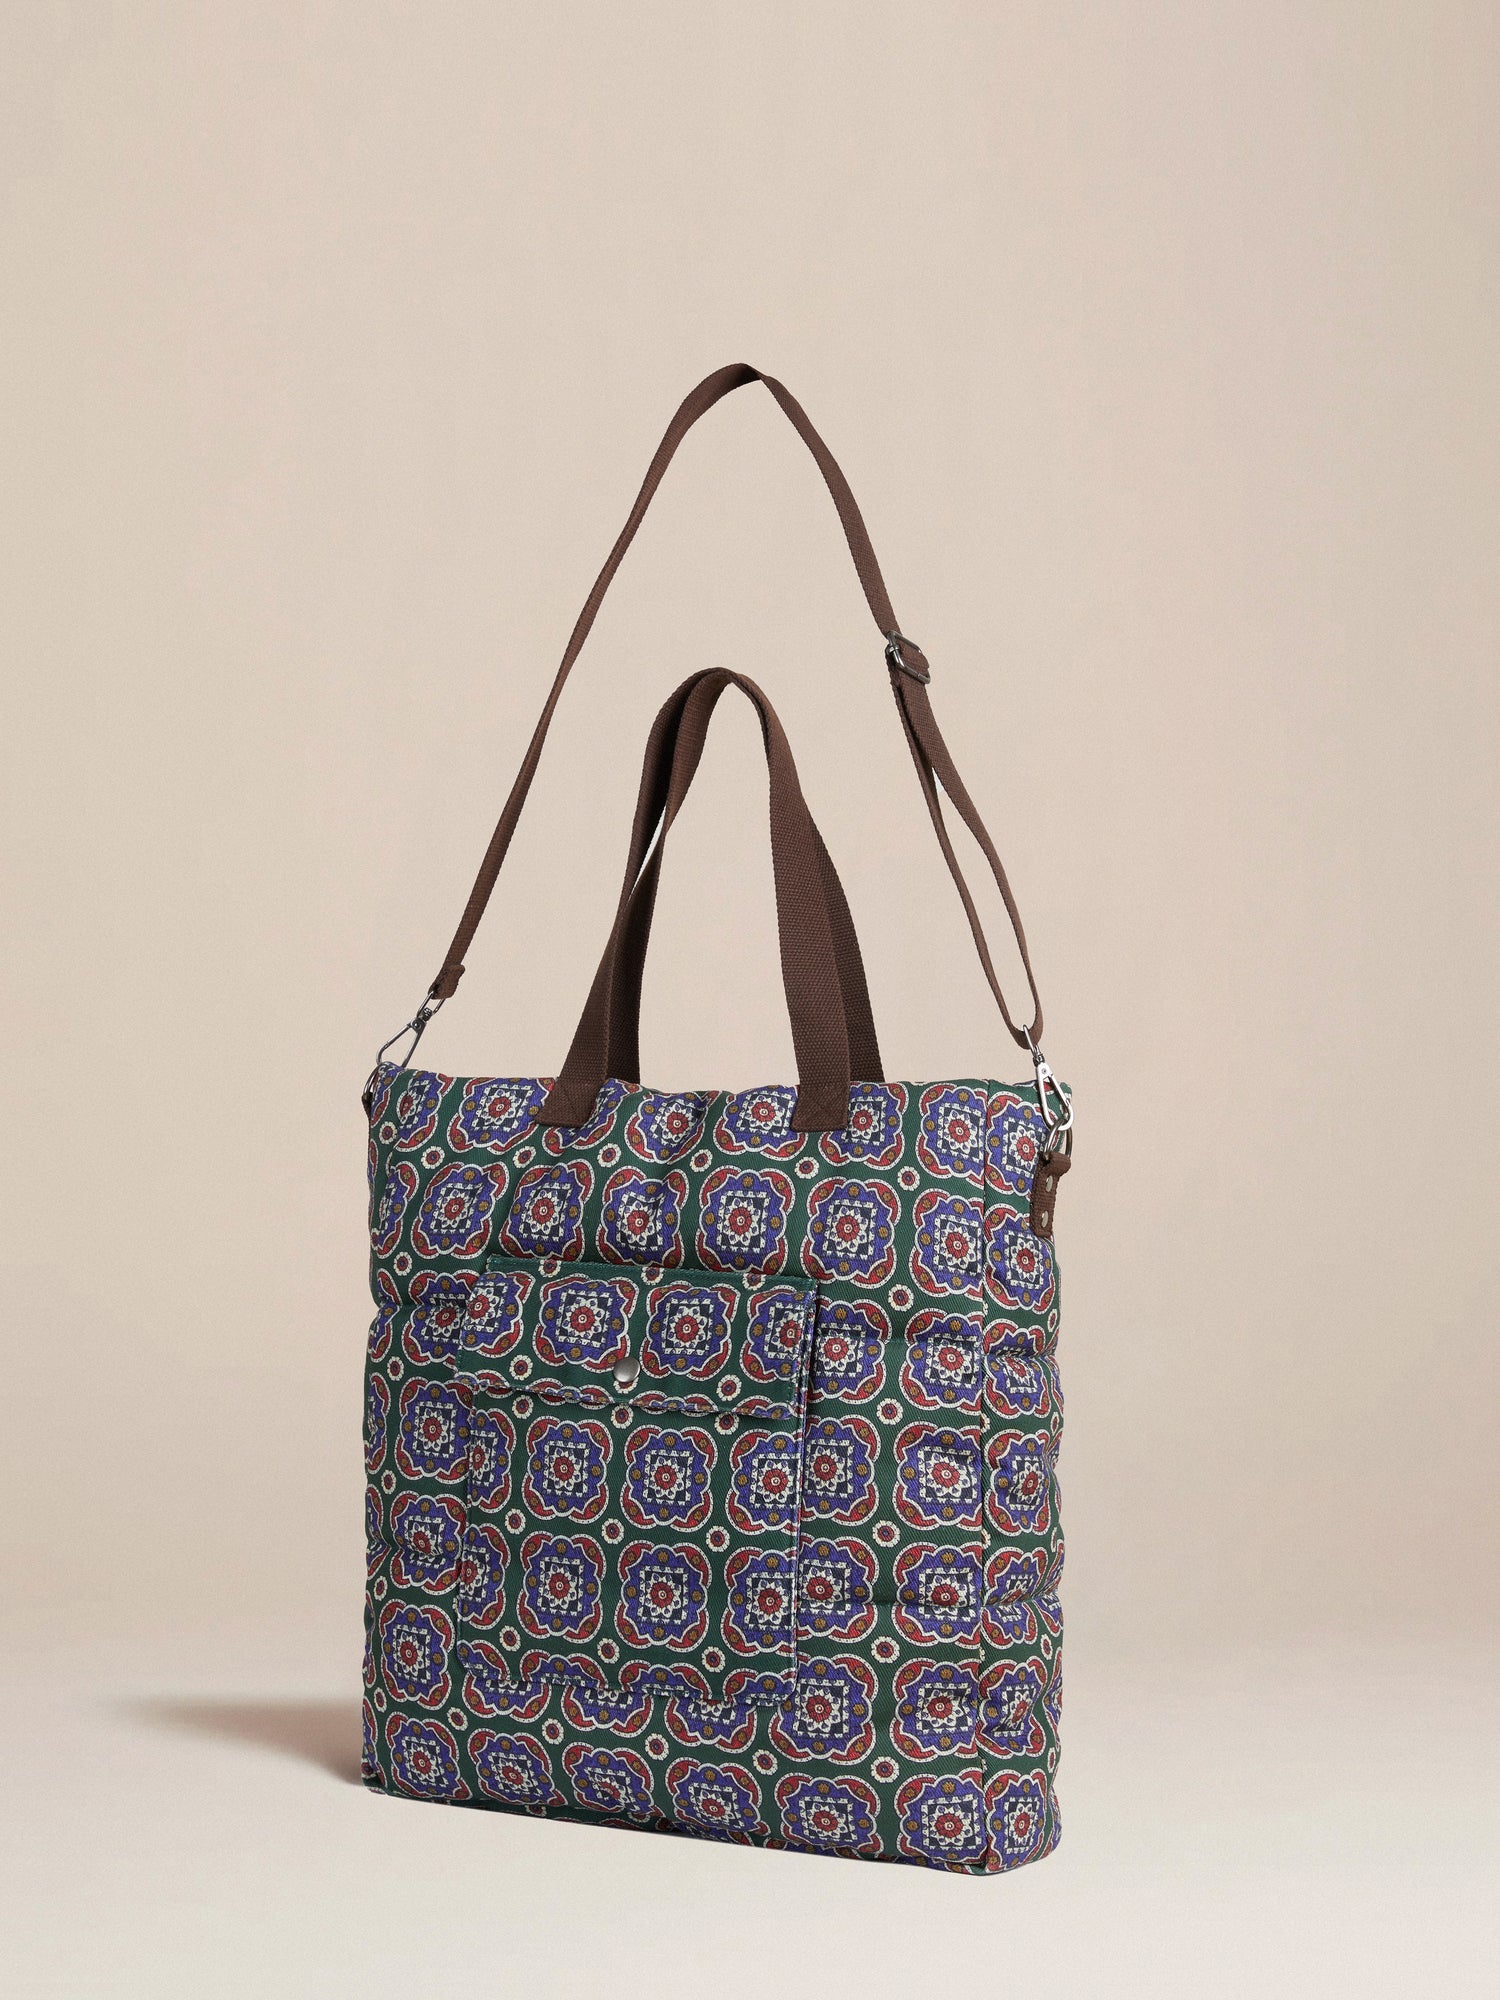 A colorful quilted cotton twill Pine Mosaic Bag tote bag with a geometric pattern by Profound.